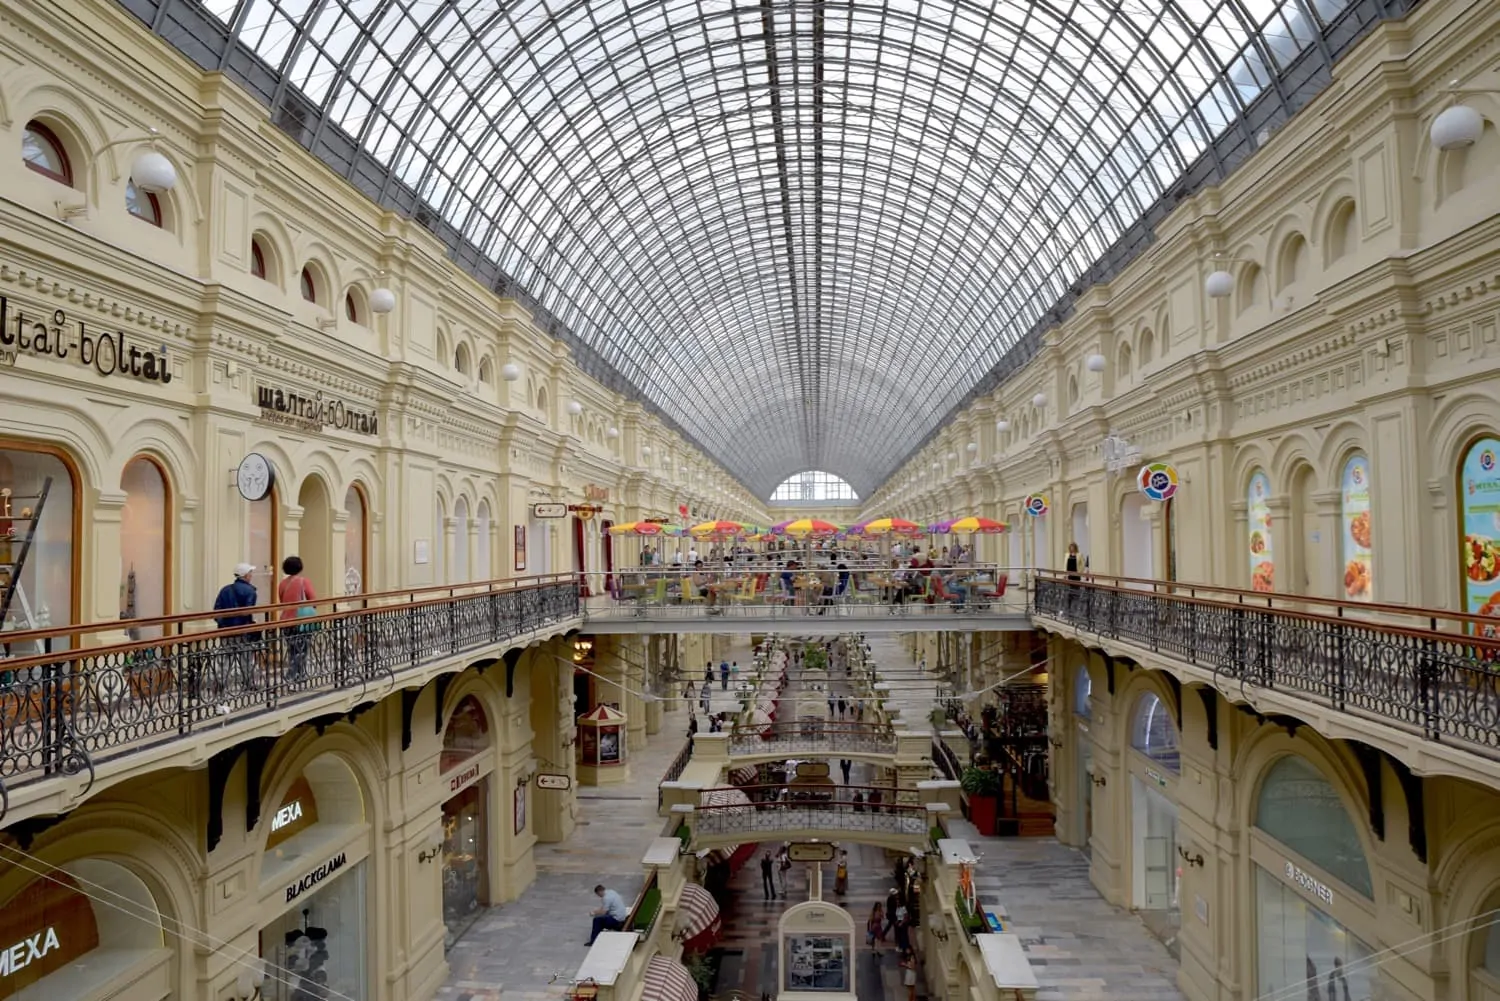 Inside GUM Department Store Russia with 2 levels of shopping in this ornate bulding. The glass domed roof tops the GUM department store one of the most famous places in russia